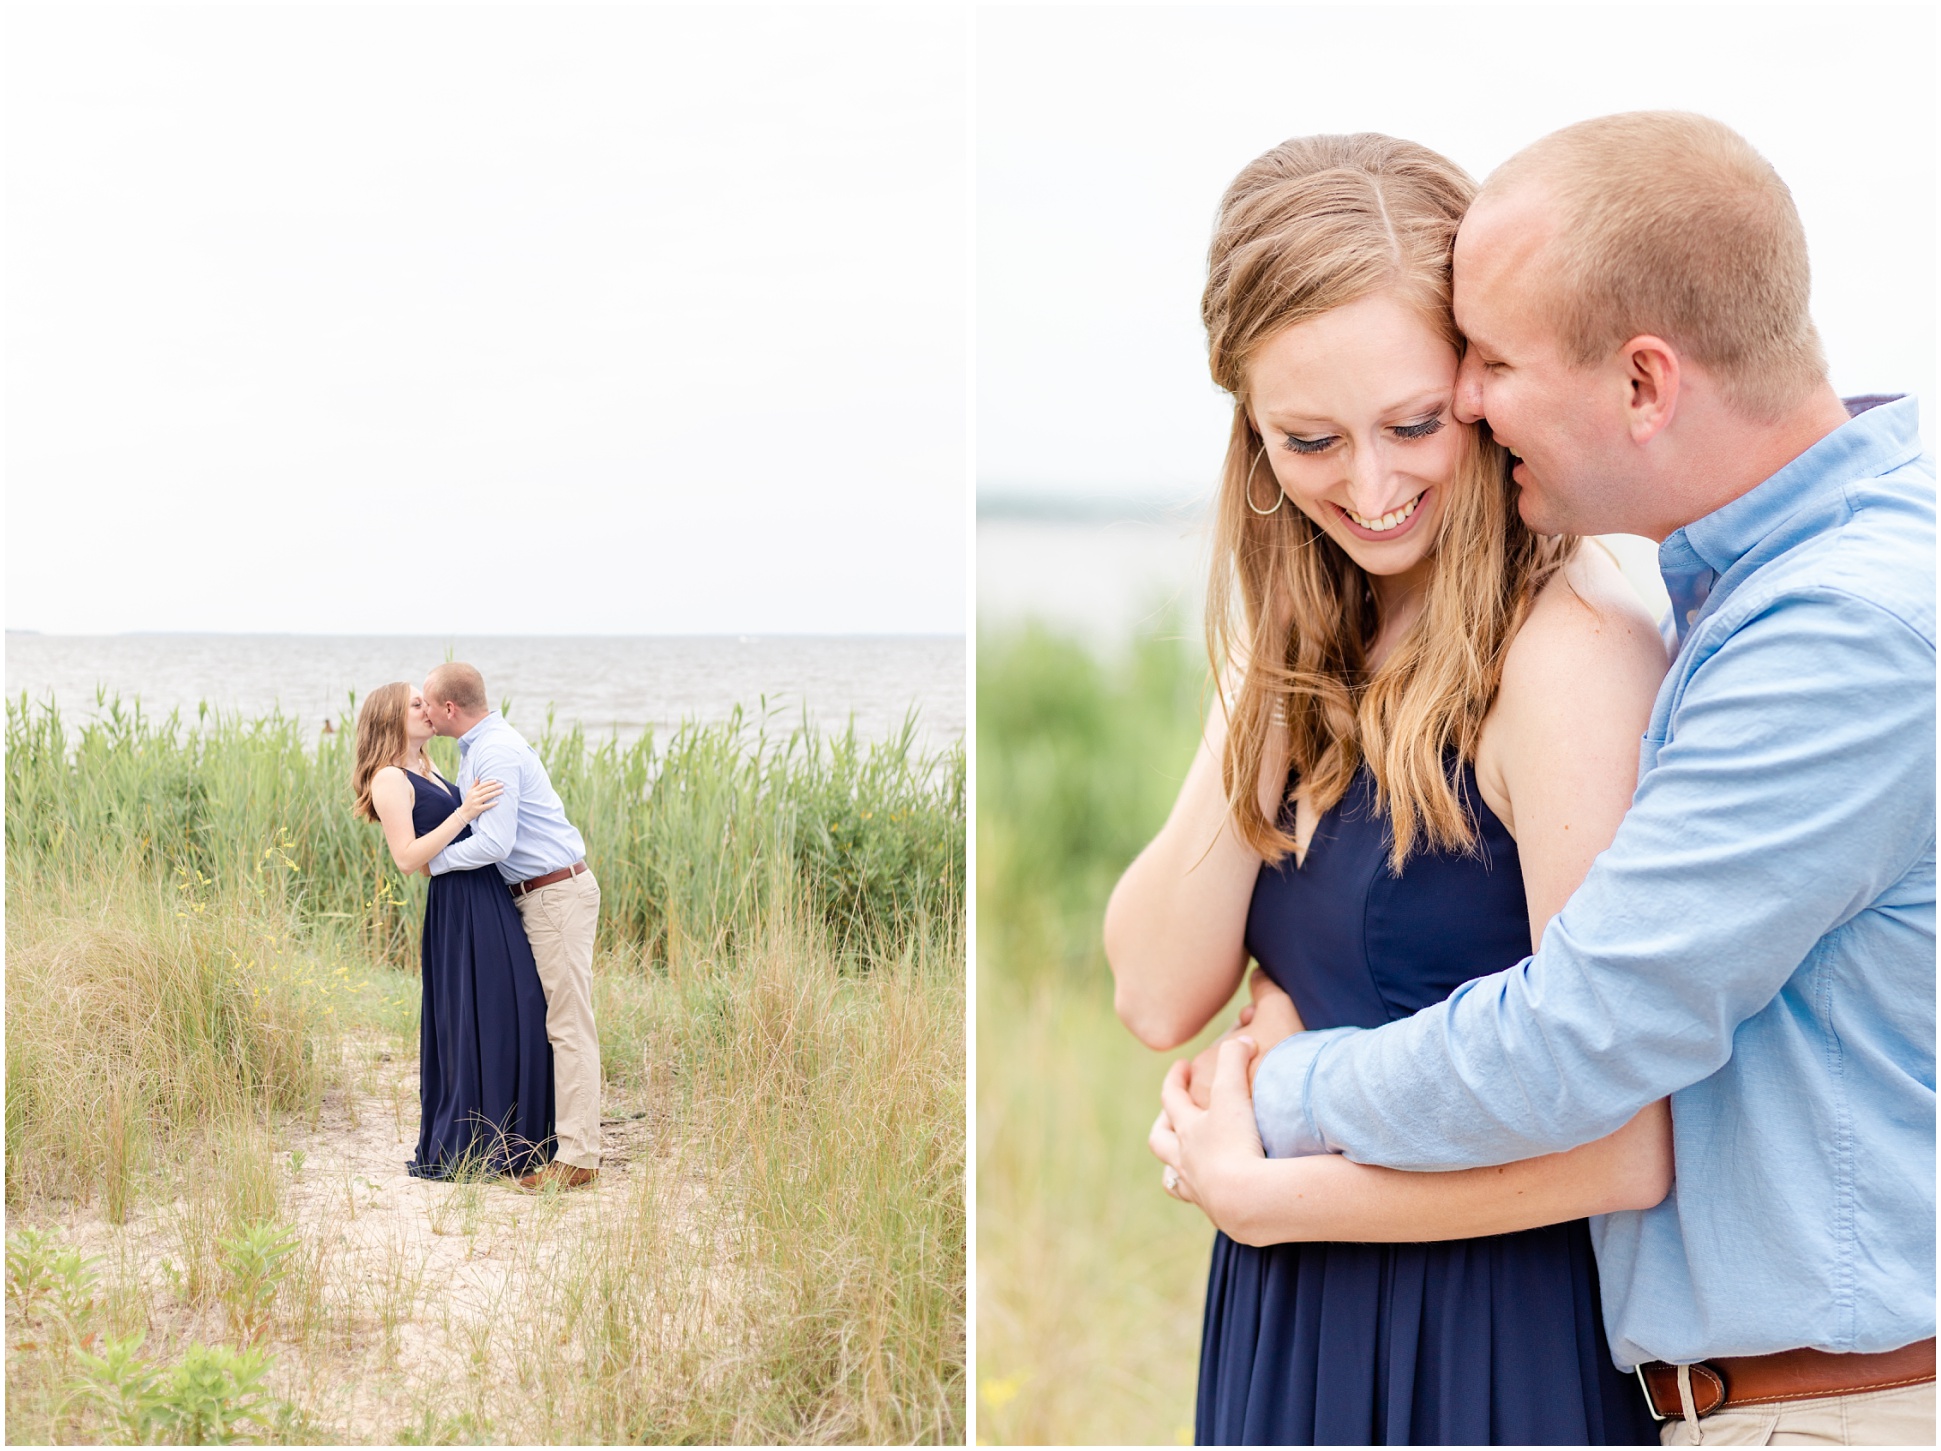 Two Images from Engagement Session at North Point Park. Left, Groom dipping bride to be, right image, groom nuzzling into brides temple and smiling